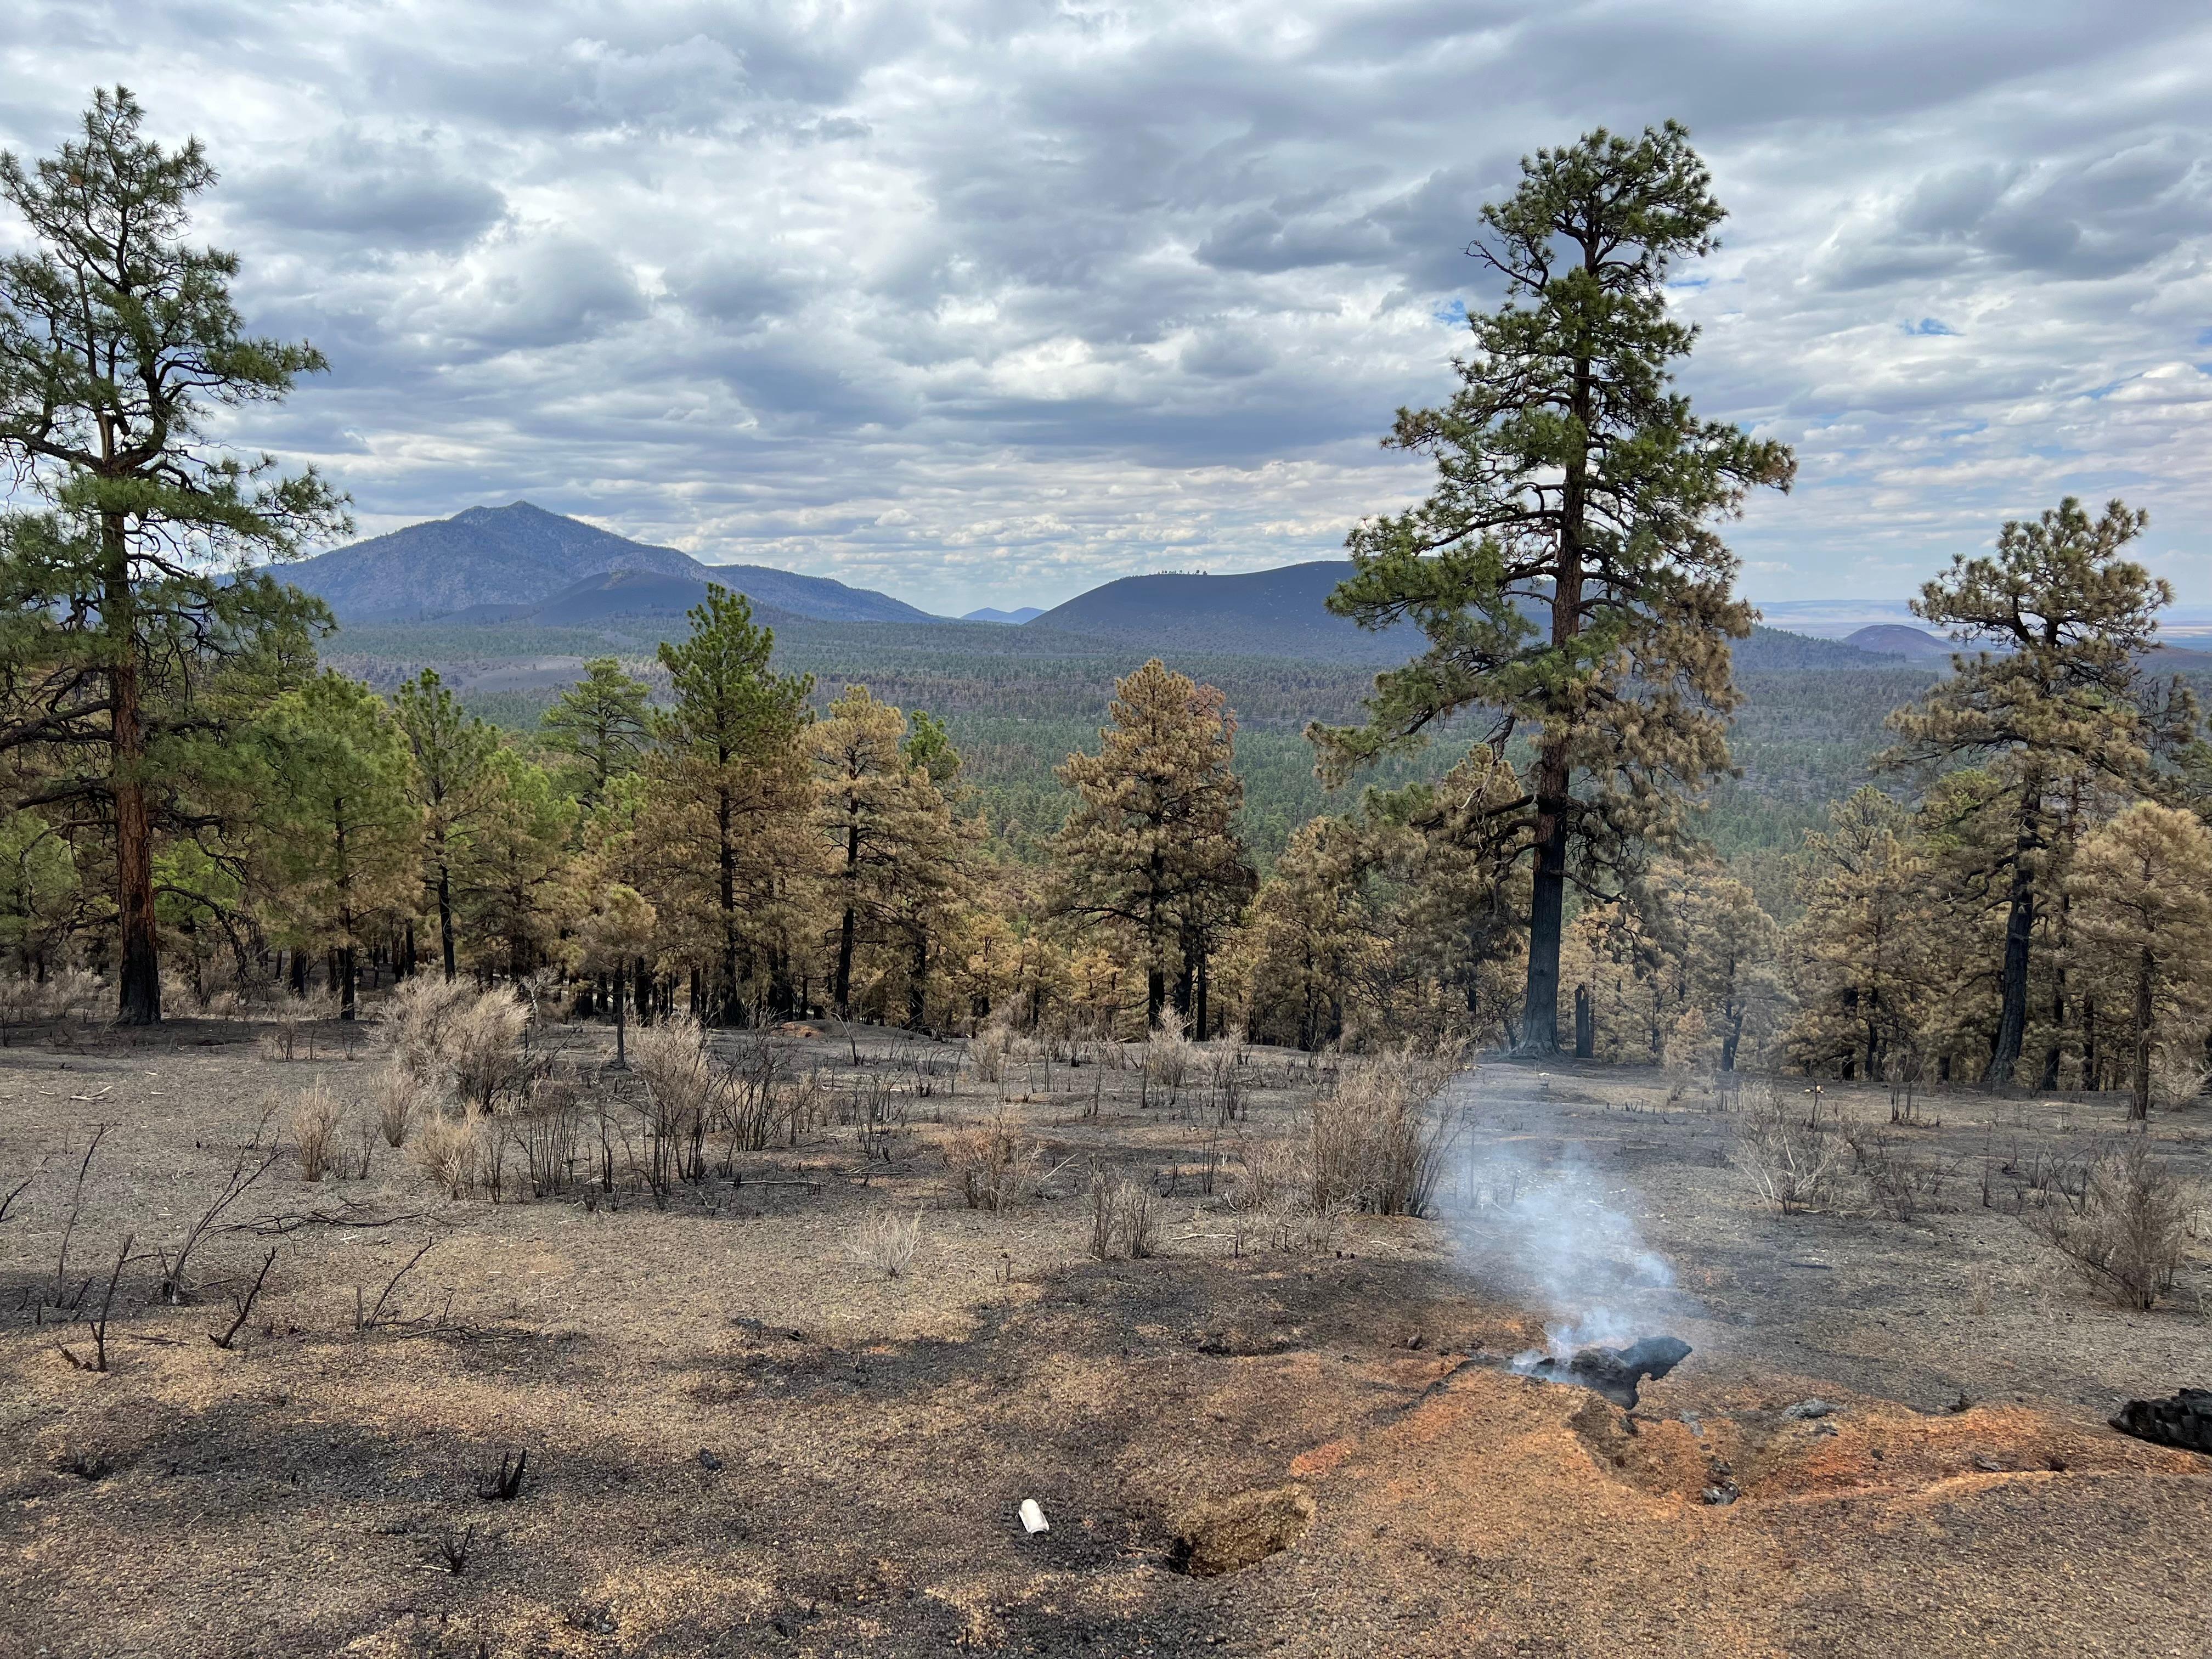 Low burn severity near Double Crater on the Haywire Fire.  Photo taken by Kyle Paffett on July 2nd, 2022.